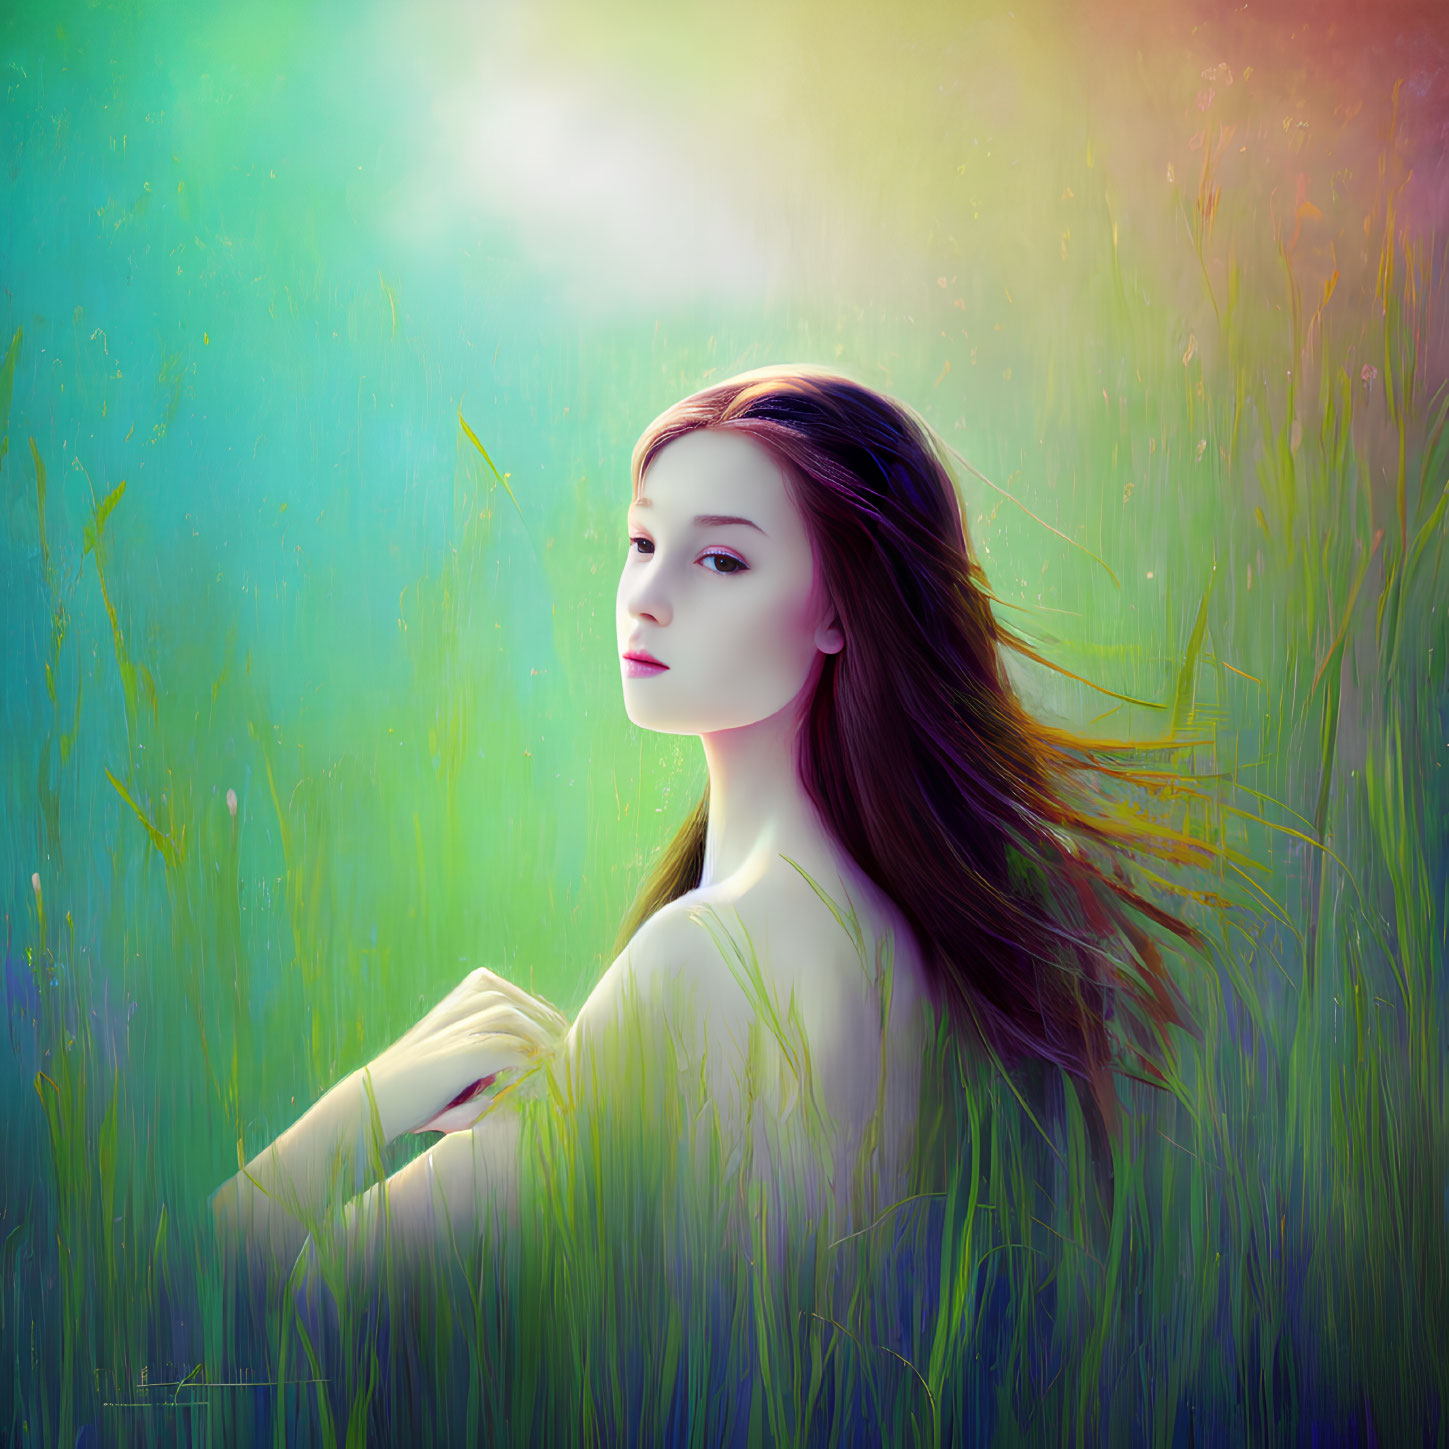 Long-haired woman in tall grass against multicolored backdrop